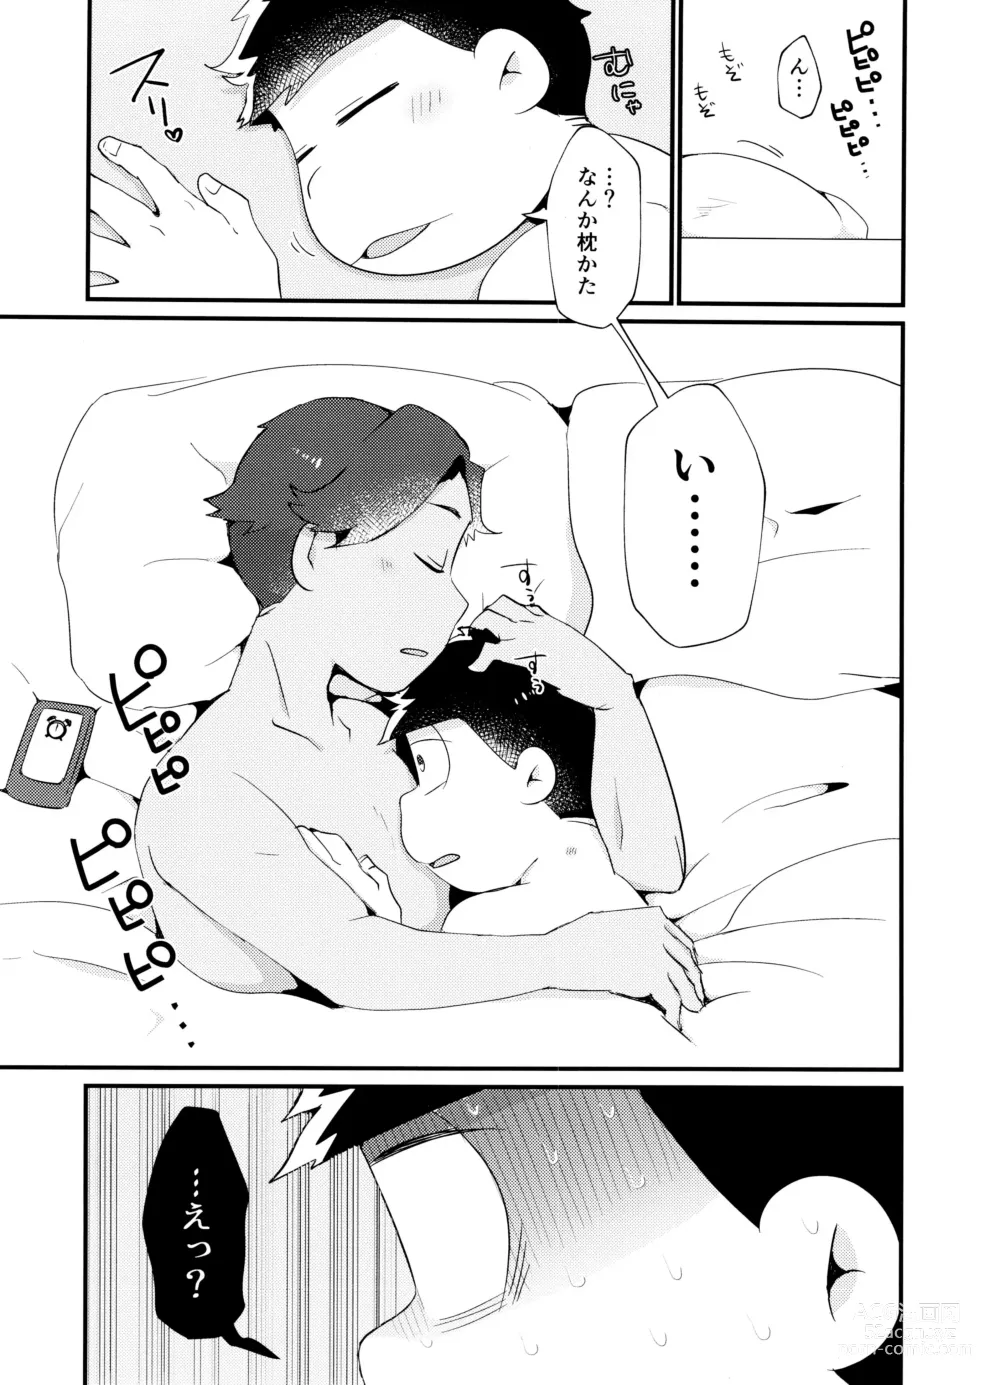 Page 3 of doujinshi My best sex friend